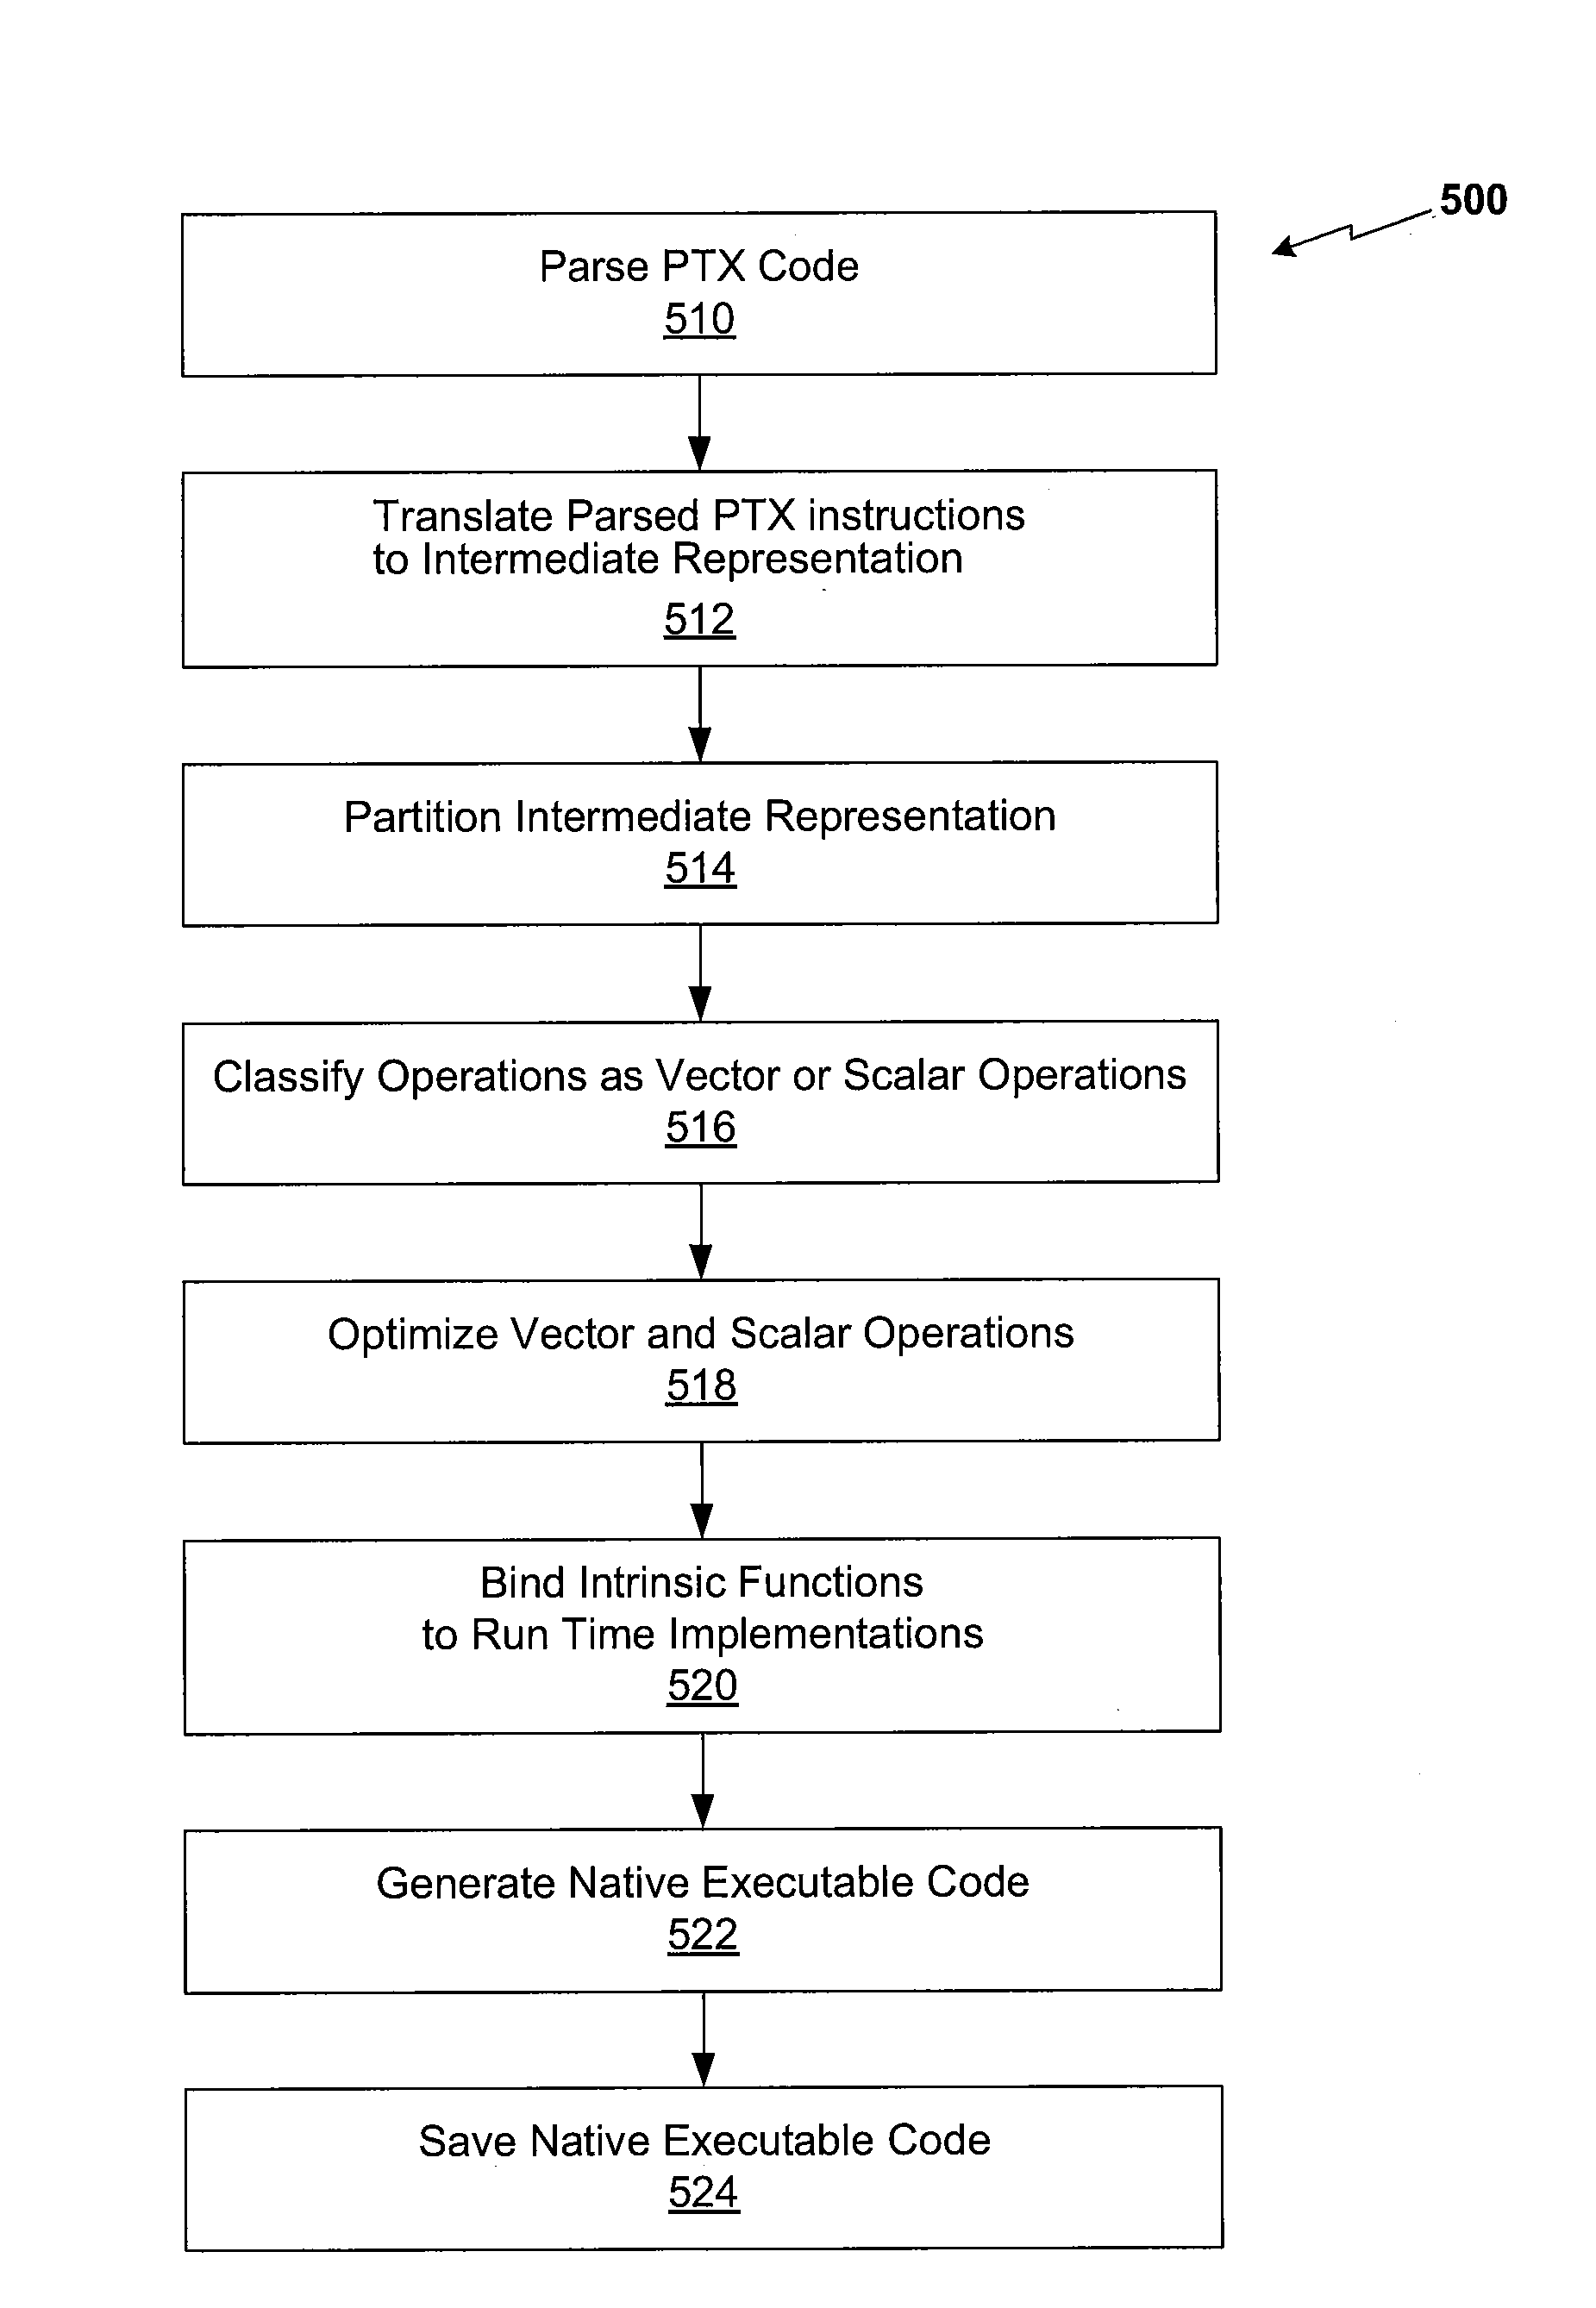 Method for compiling a parallel thread execution program for general execution